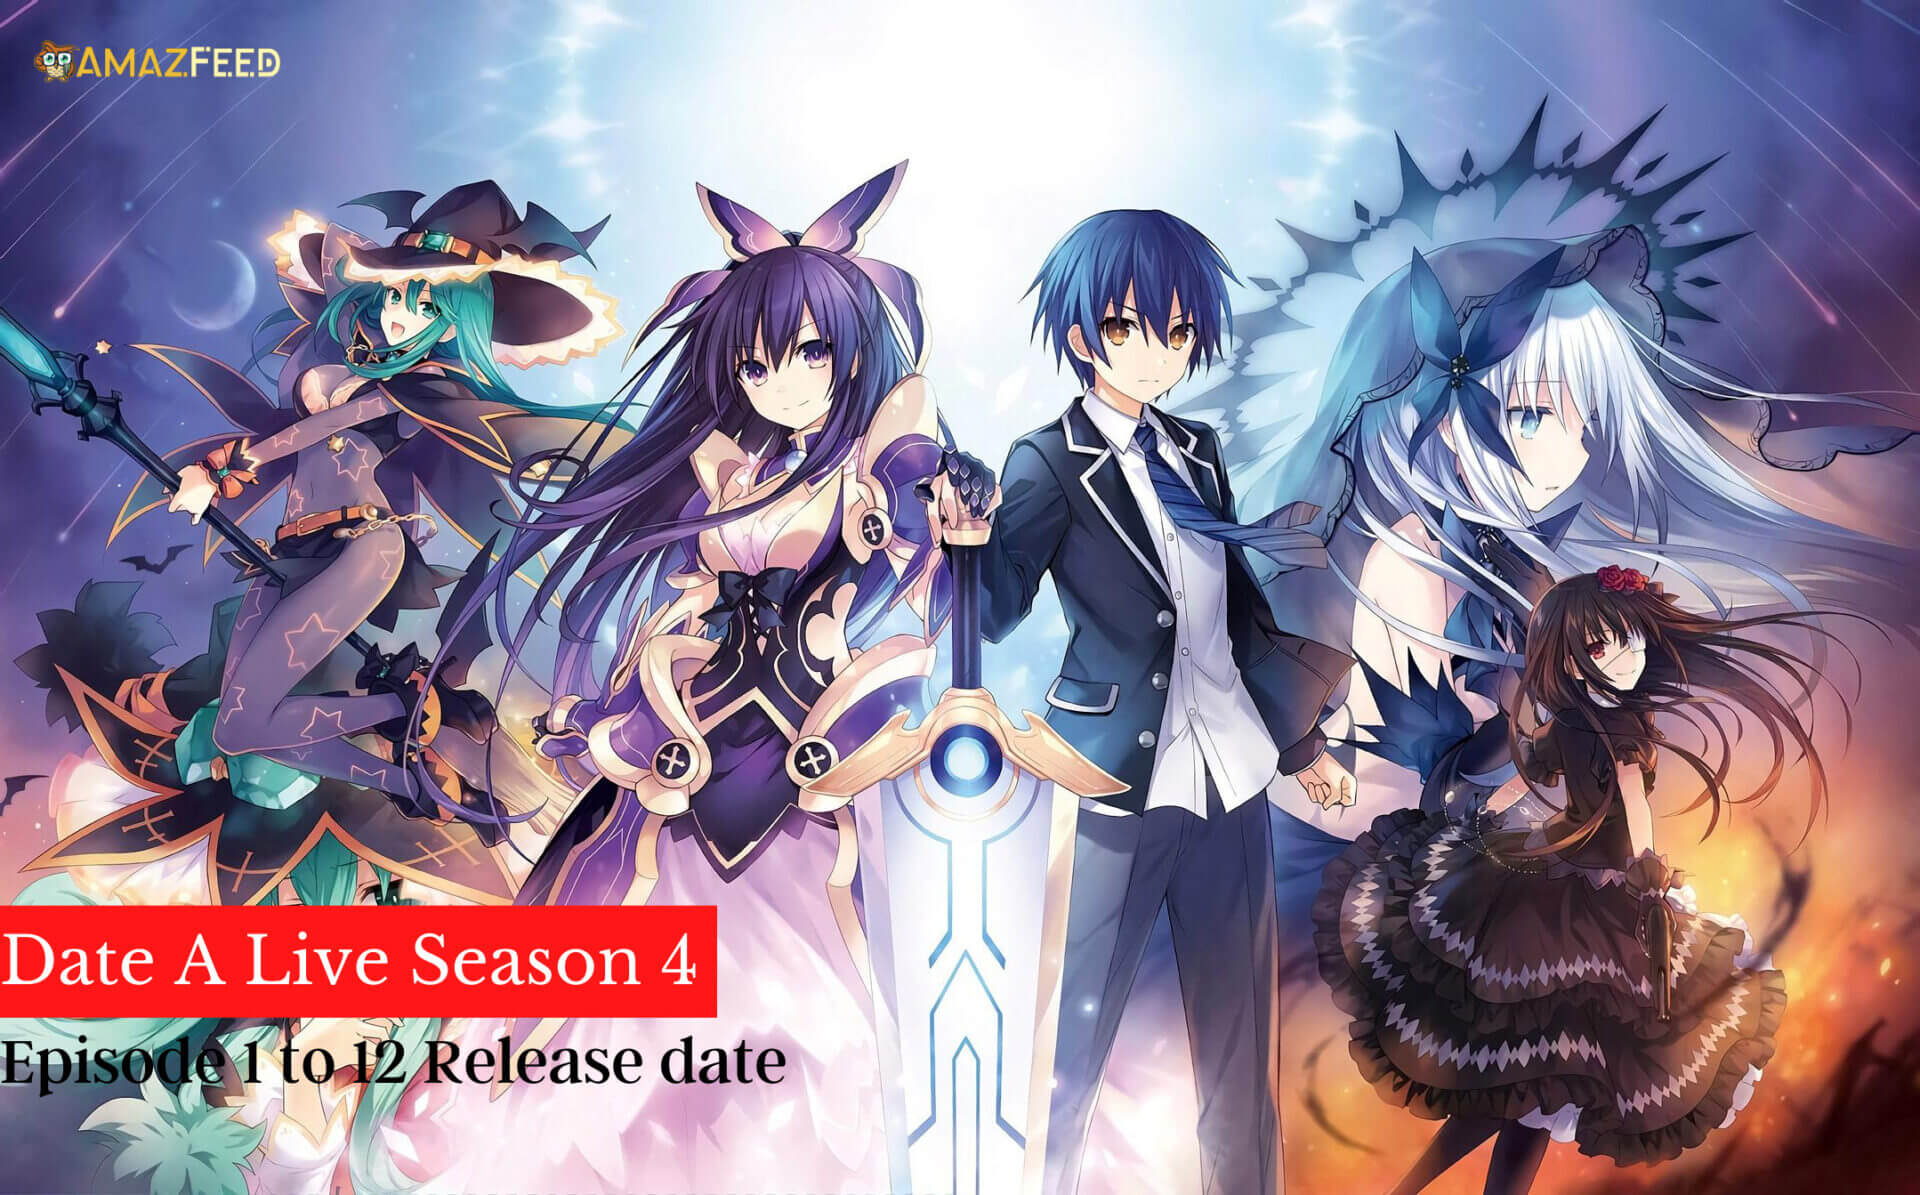 Date A Live Season 4 episode 1 to 12 release date